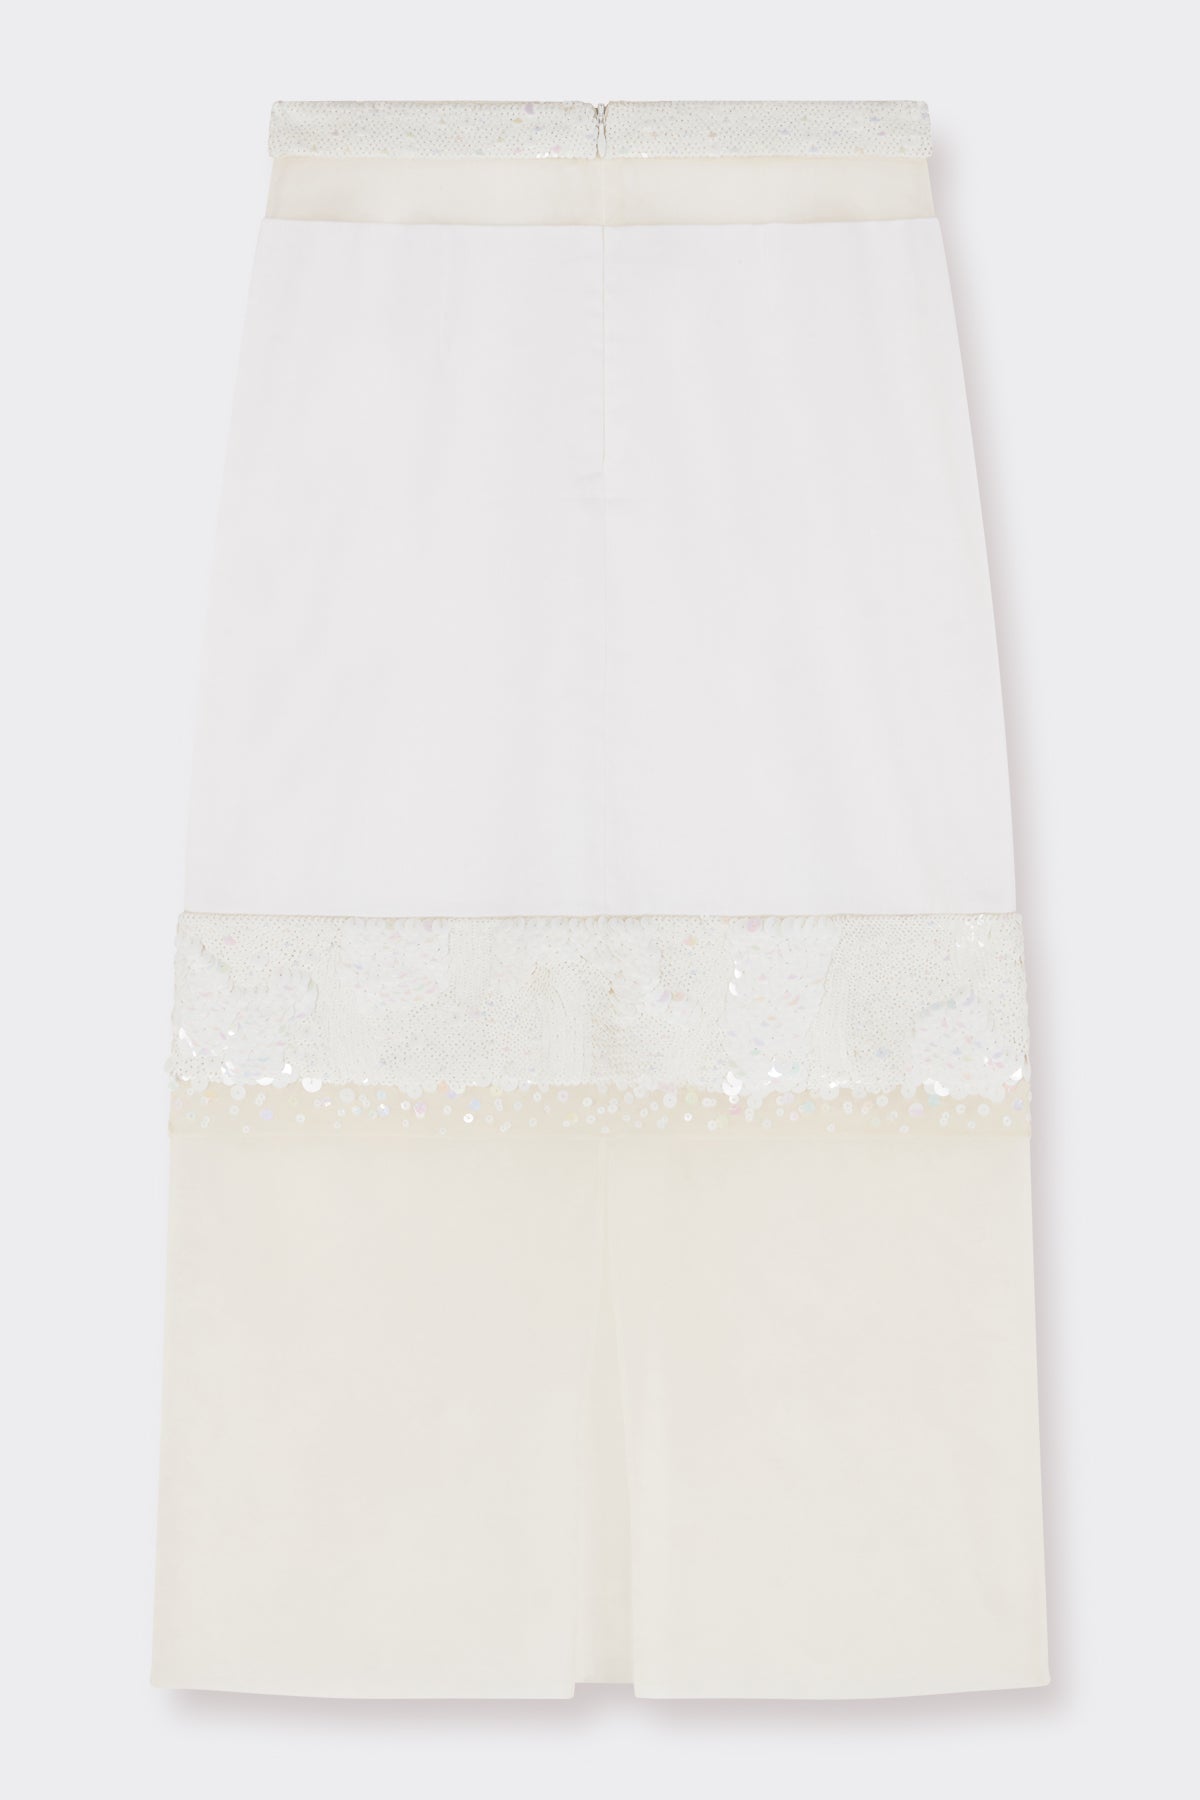 Halima Skirt in Soft White| Noon by Noor